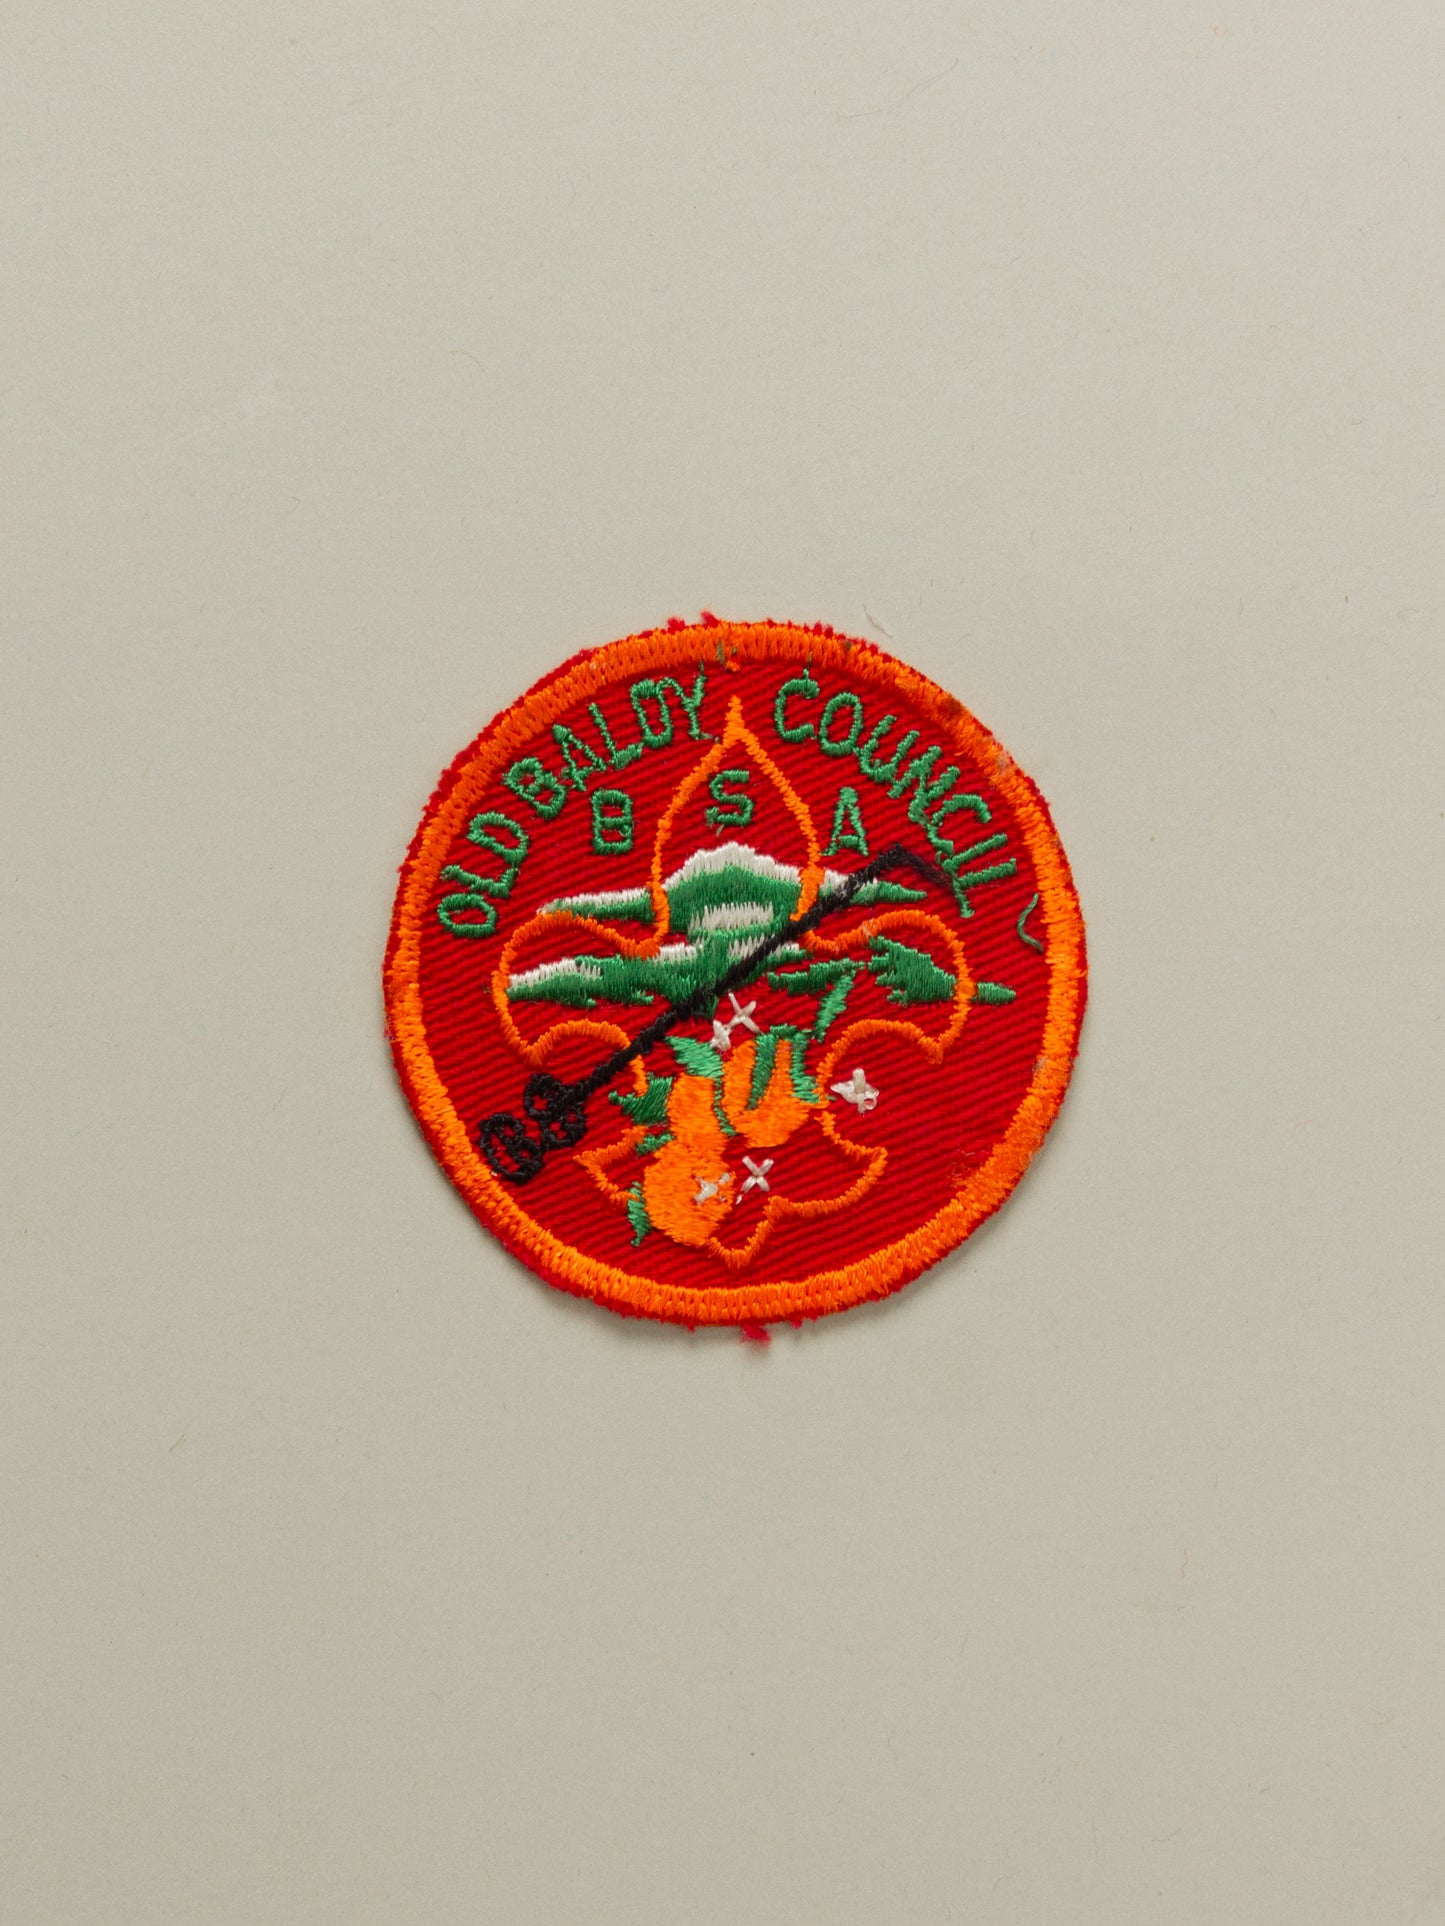 Boy Scouts of America Patch